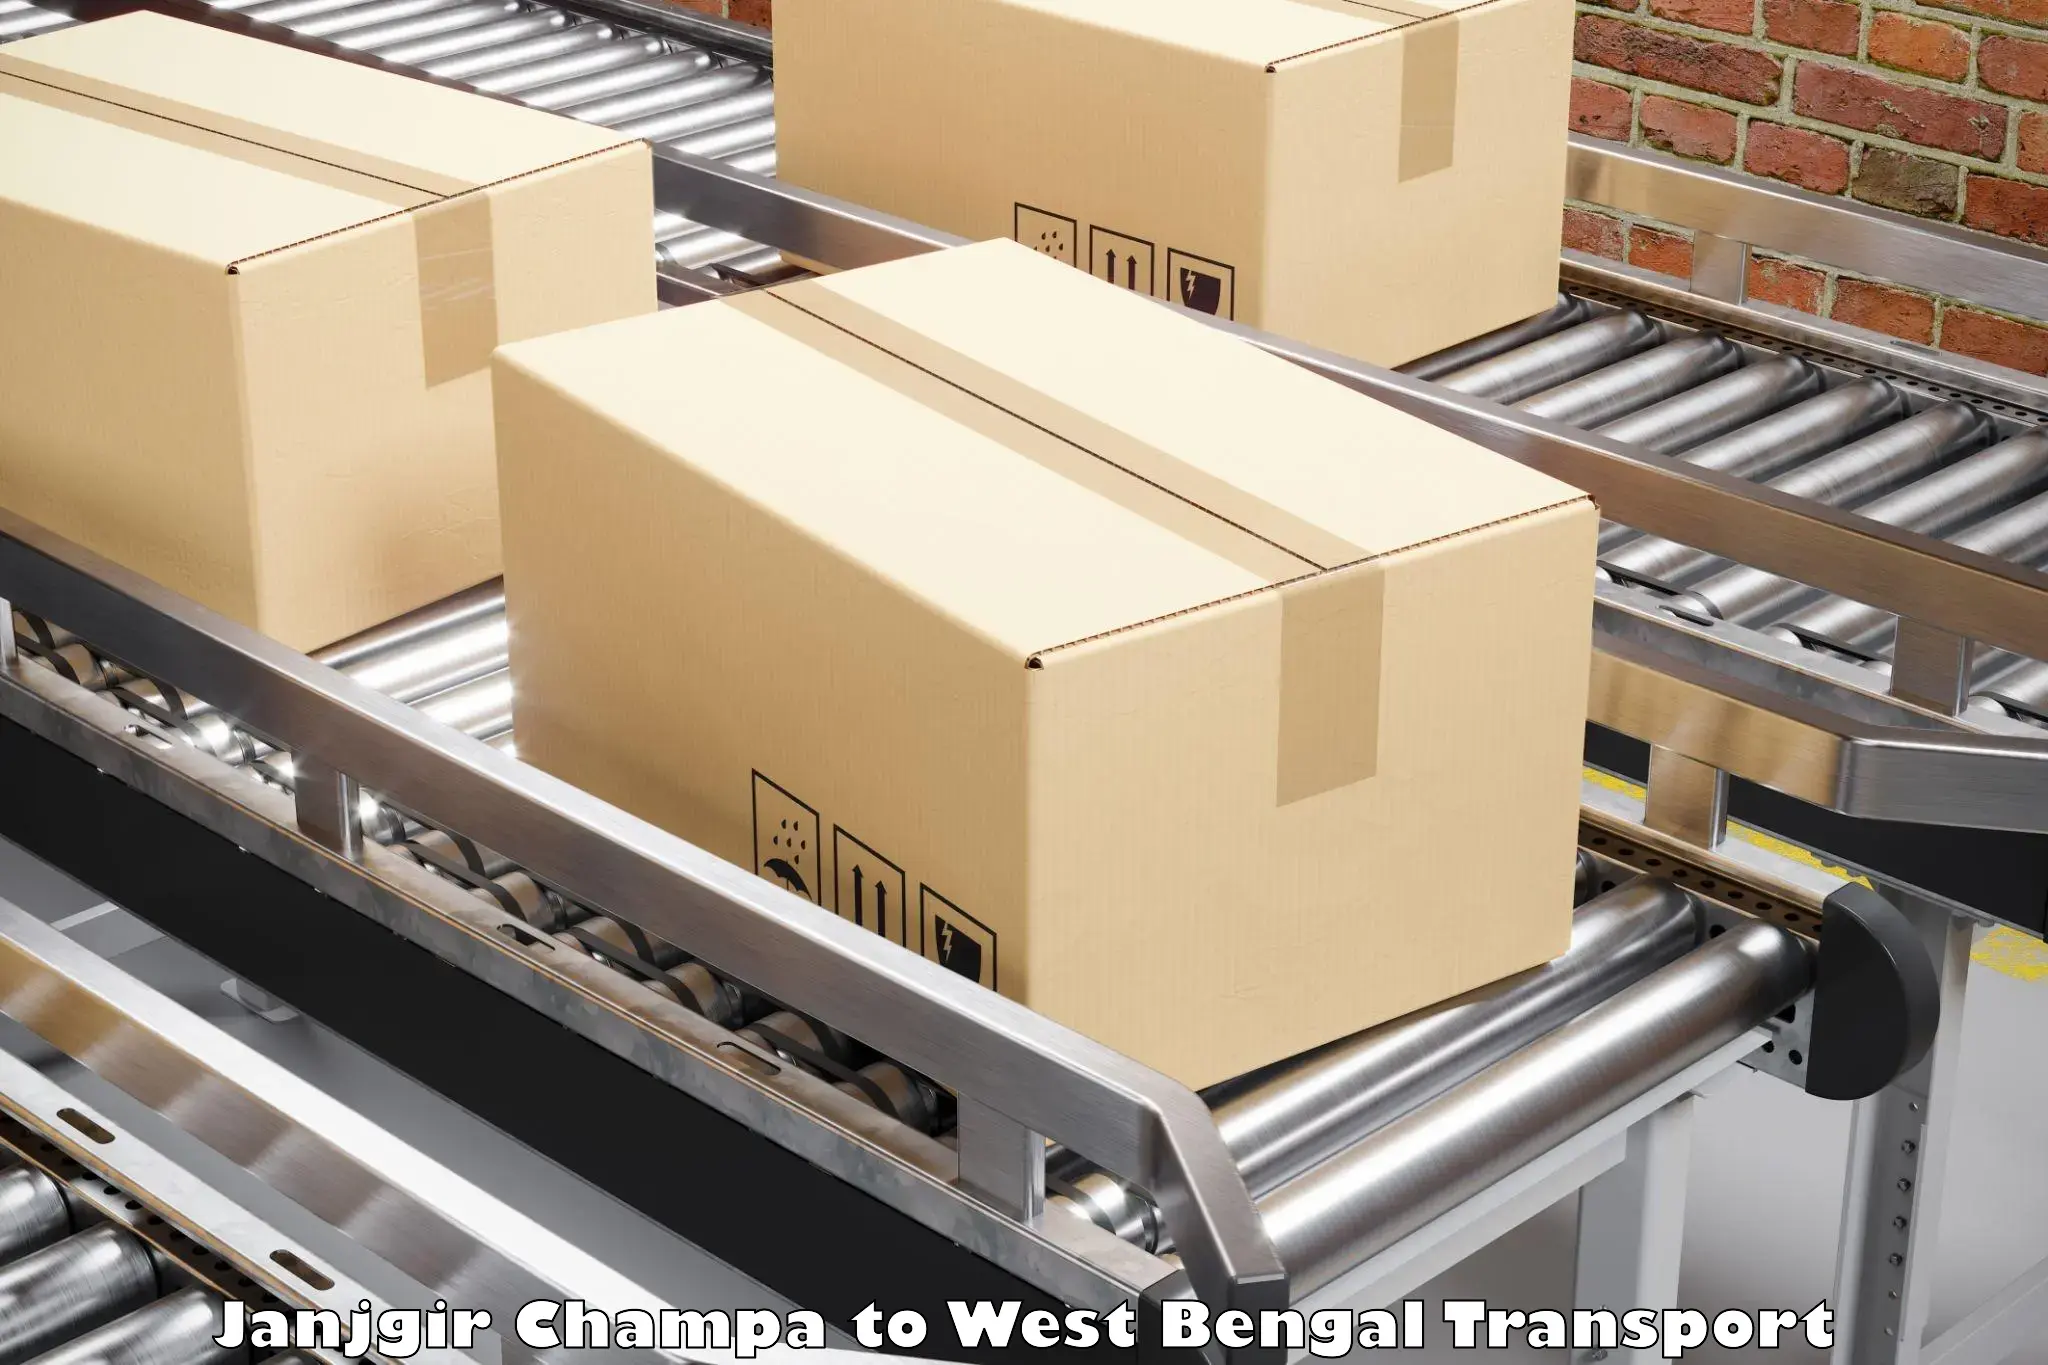 Air freight transport services Janjgir Champa to South 24 Parganas